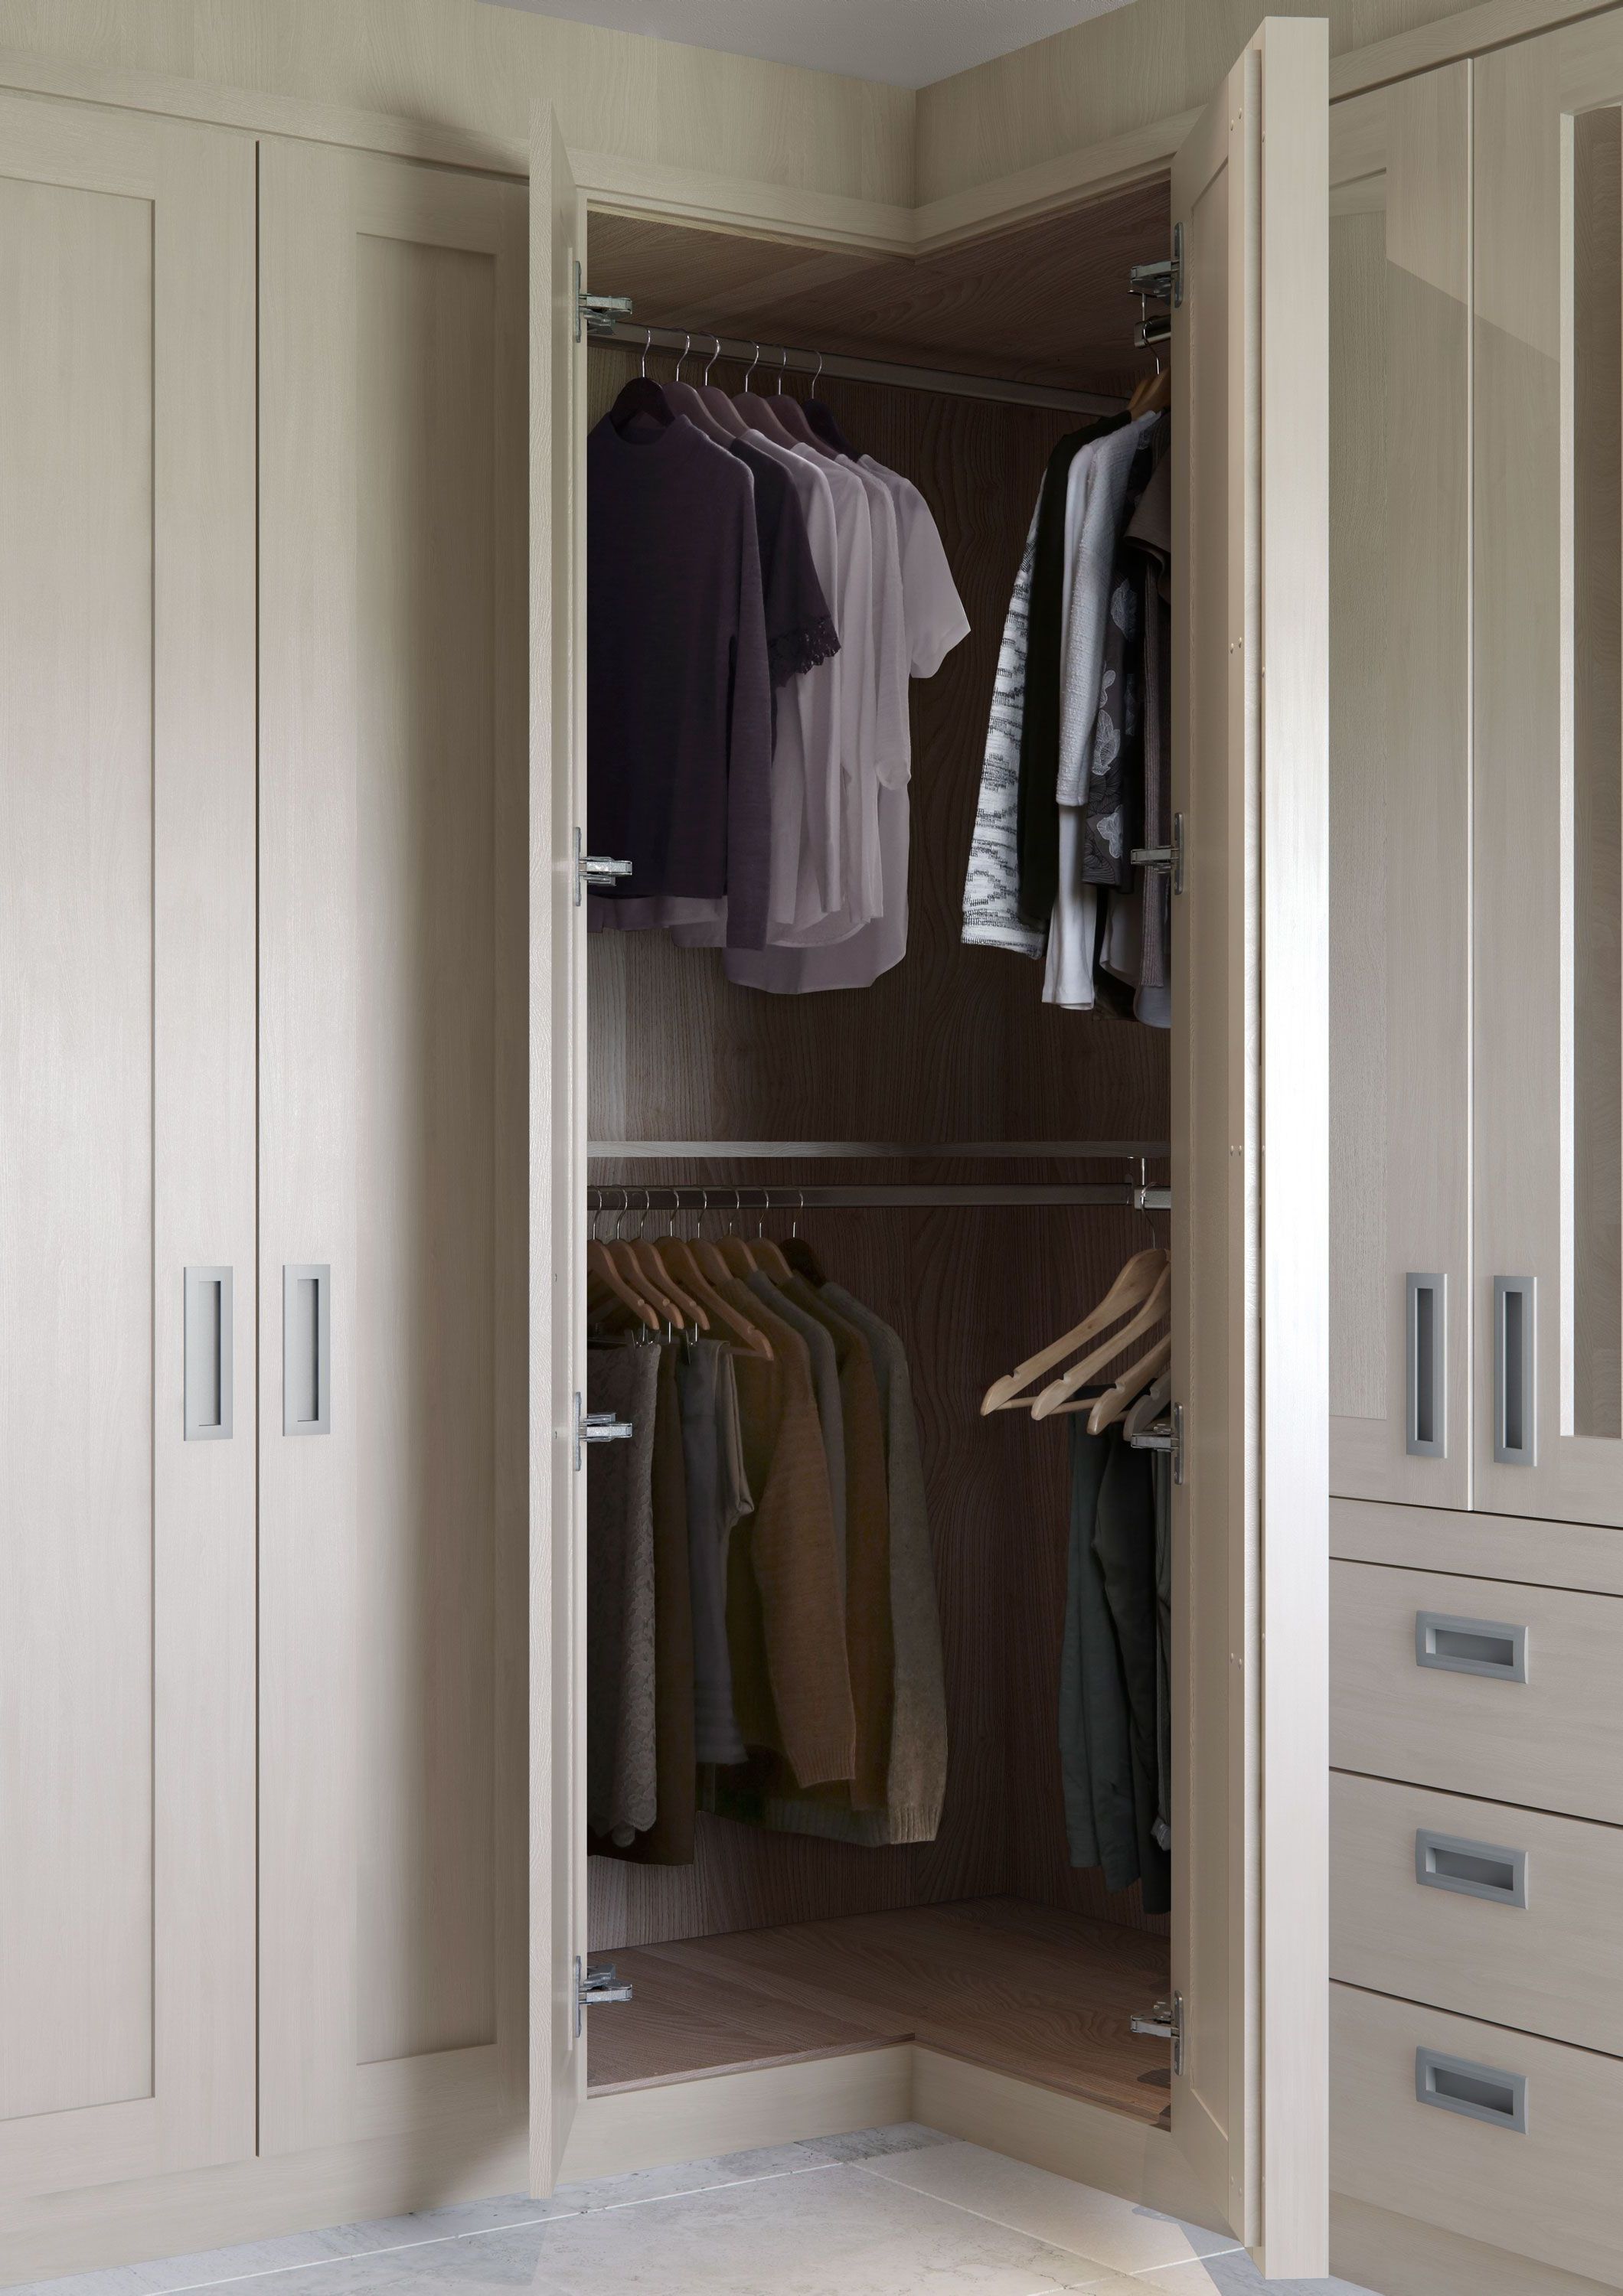 Make The Most Of The Corner Space With This Angled Double Hanging Rail. |  Corner Wardrobe, Corner Wardrobe Closet, Bedroom Built In Wardrobe Pertaining To Tall Double Rail Wardrobes (Gallery 6 of 20)